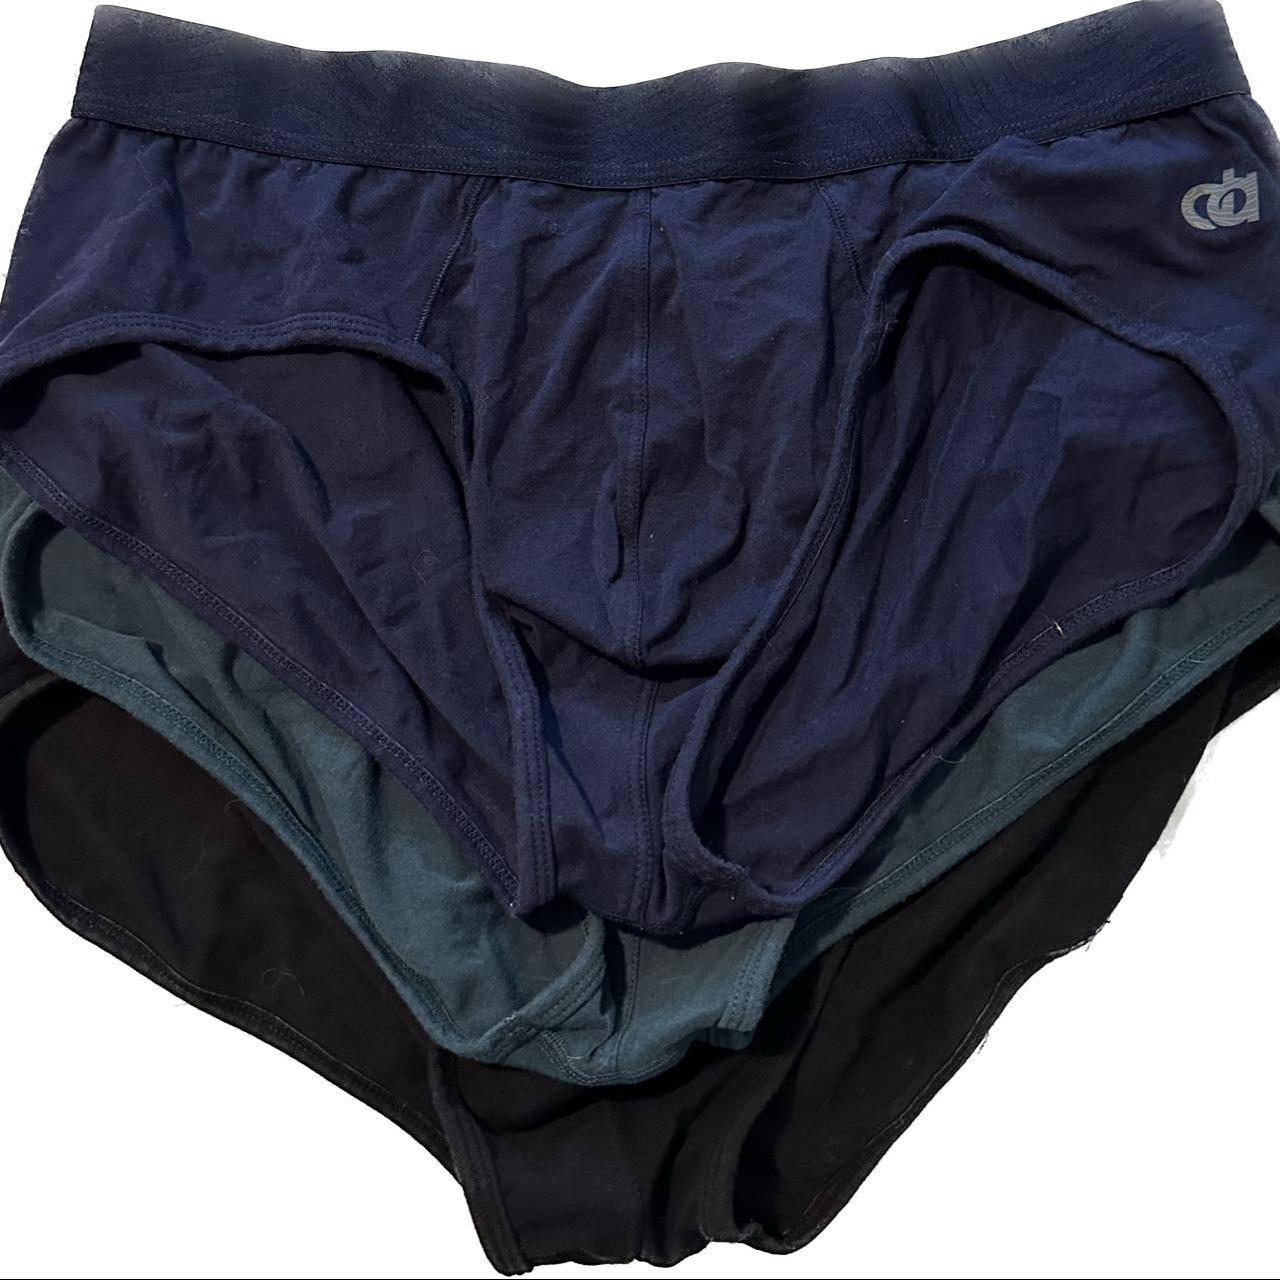 David Archy Ultra Soft Bamboo Basic Boxer Brief Review